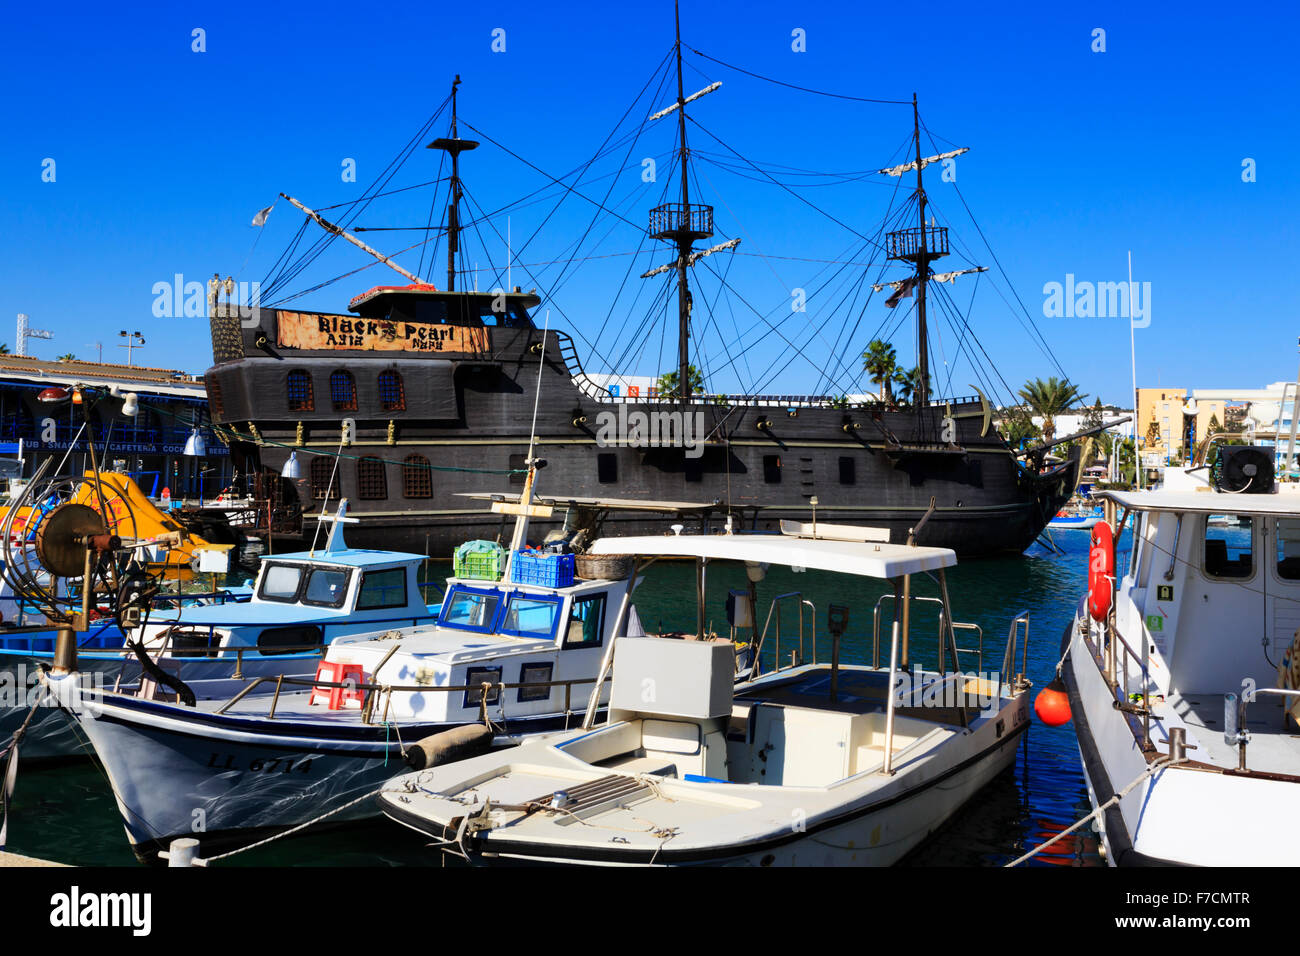 'Black Pearl' party boat in Ayia Napa harbour with local fishing boats. Ayia Napa harbour, Cyprus. Stock Photo